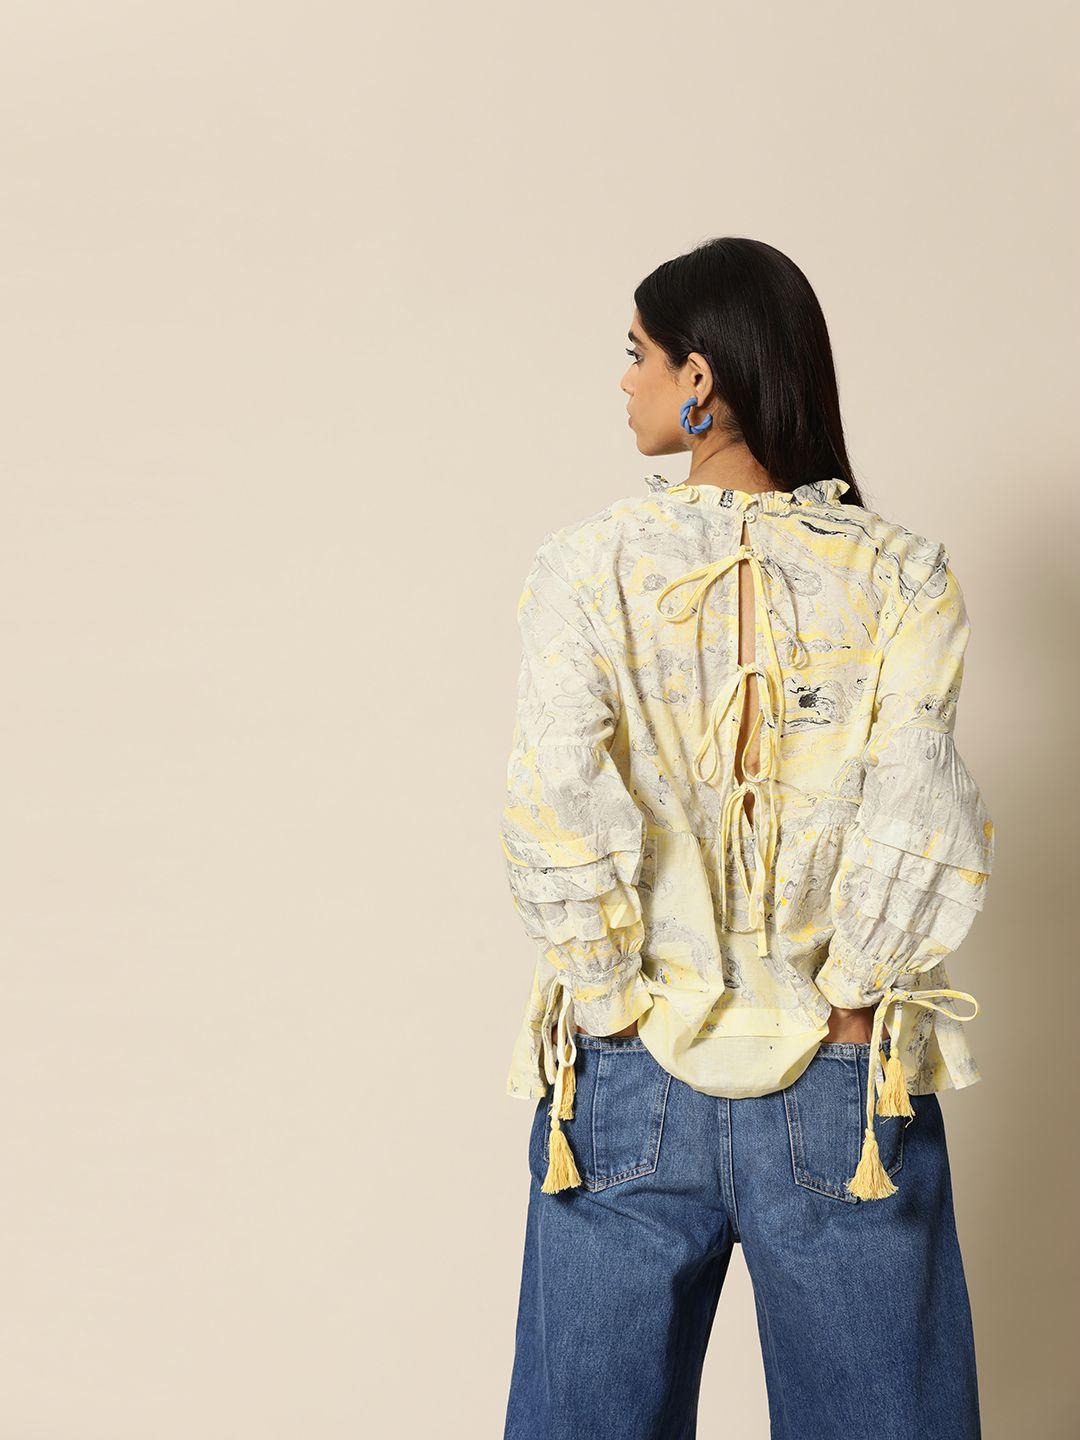 bower-yellow-marbling-printed-pure-cotton-extended-sleeves-longline-top-with-tassels